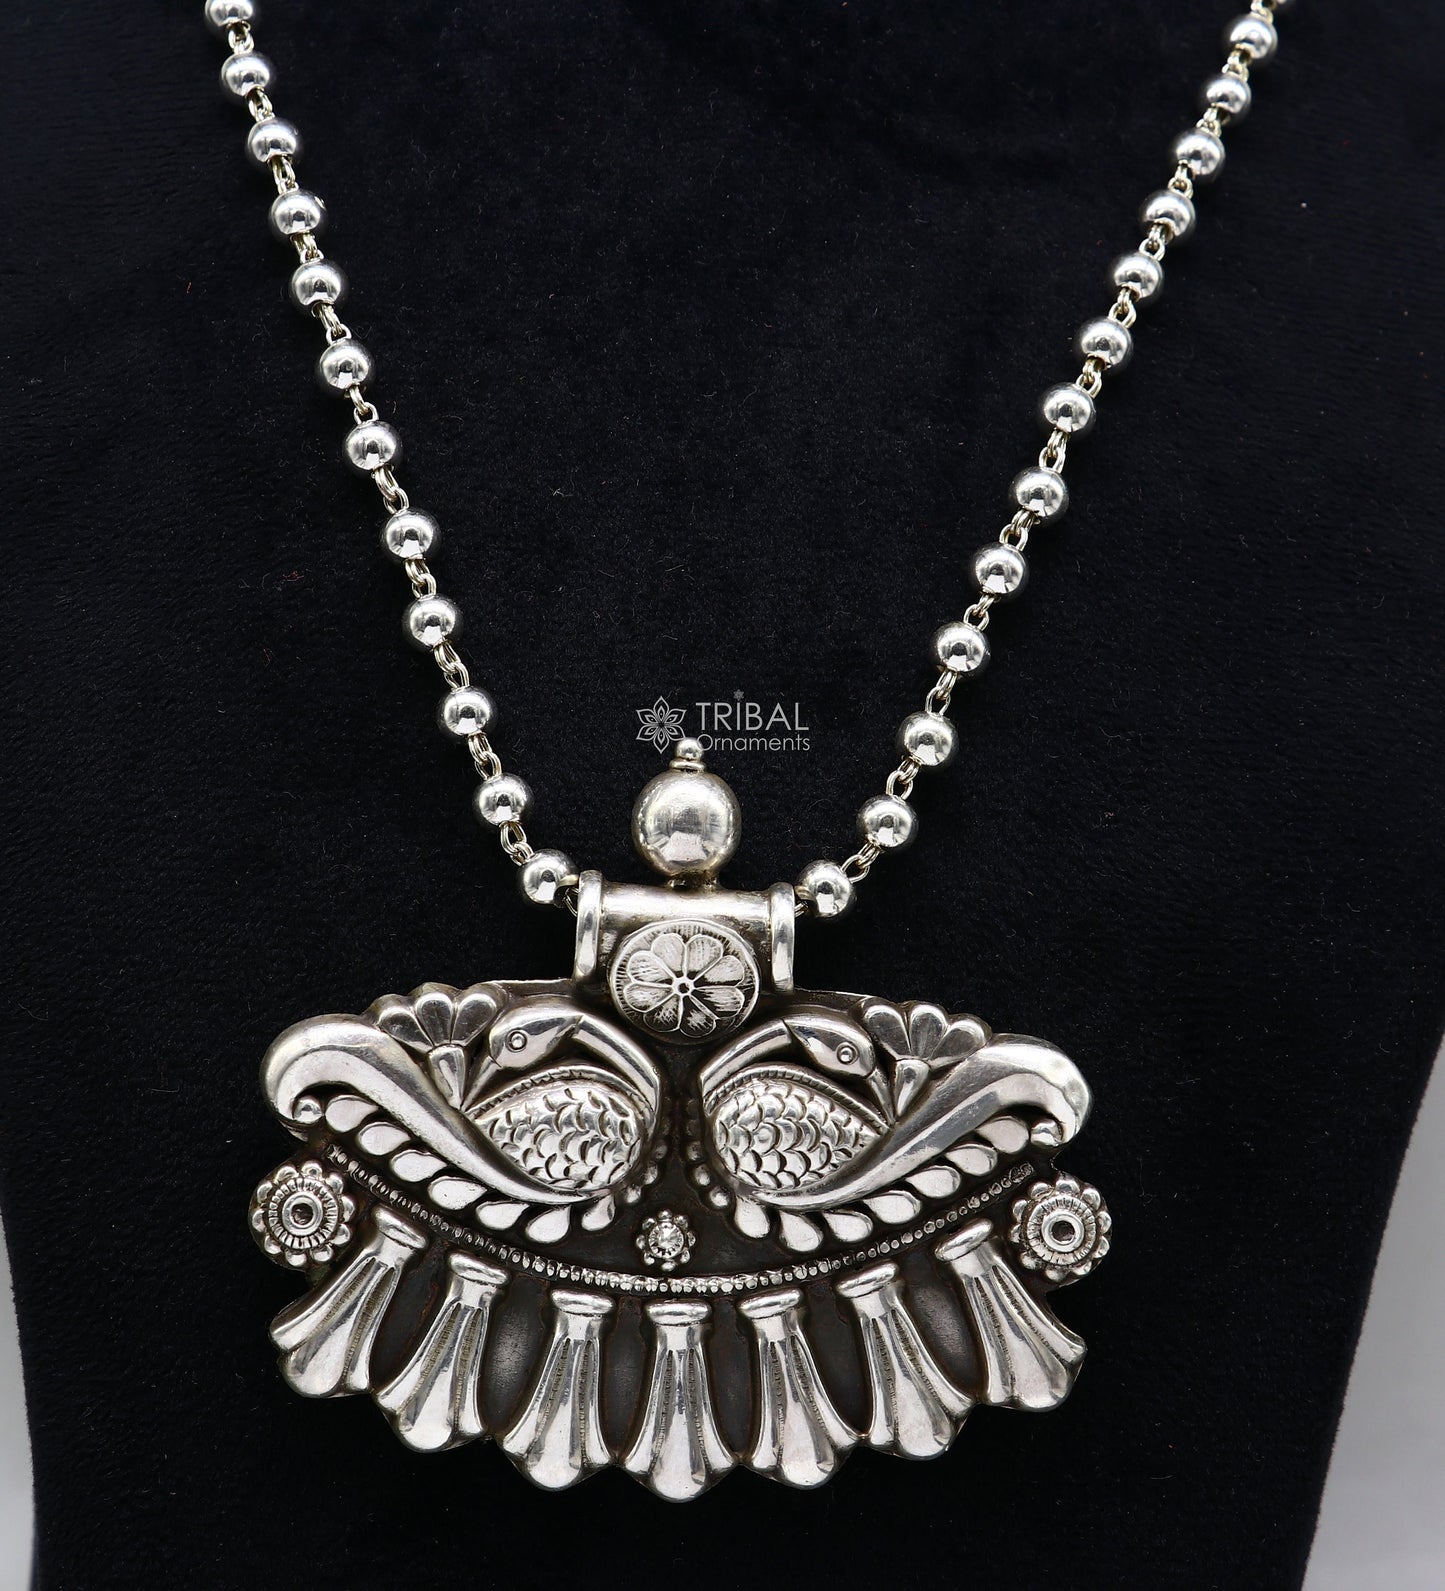 Vintage cultural design trendy 925 sterling silver handmade pendant style ethnic tribal functional long necklace jewelry India nsp584 - TRIBAL ORNAMENTS